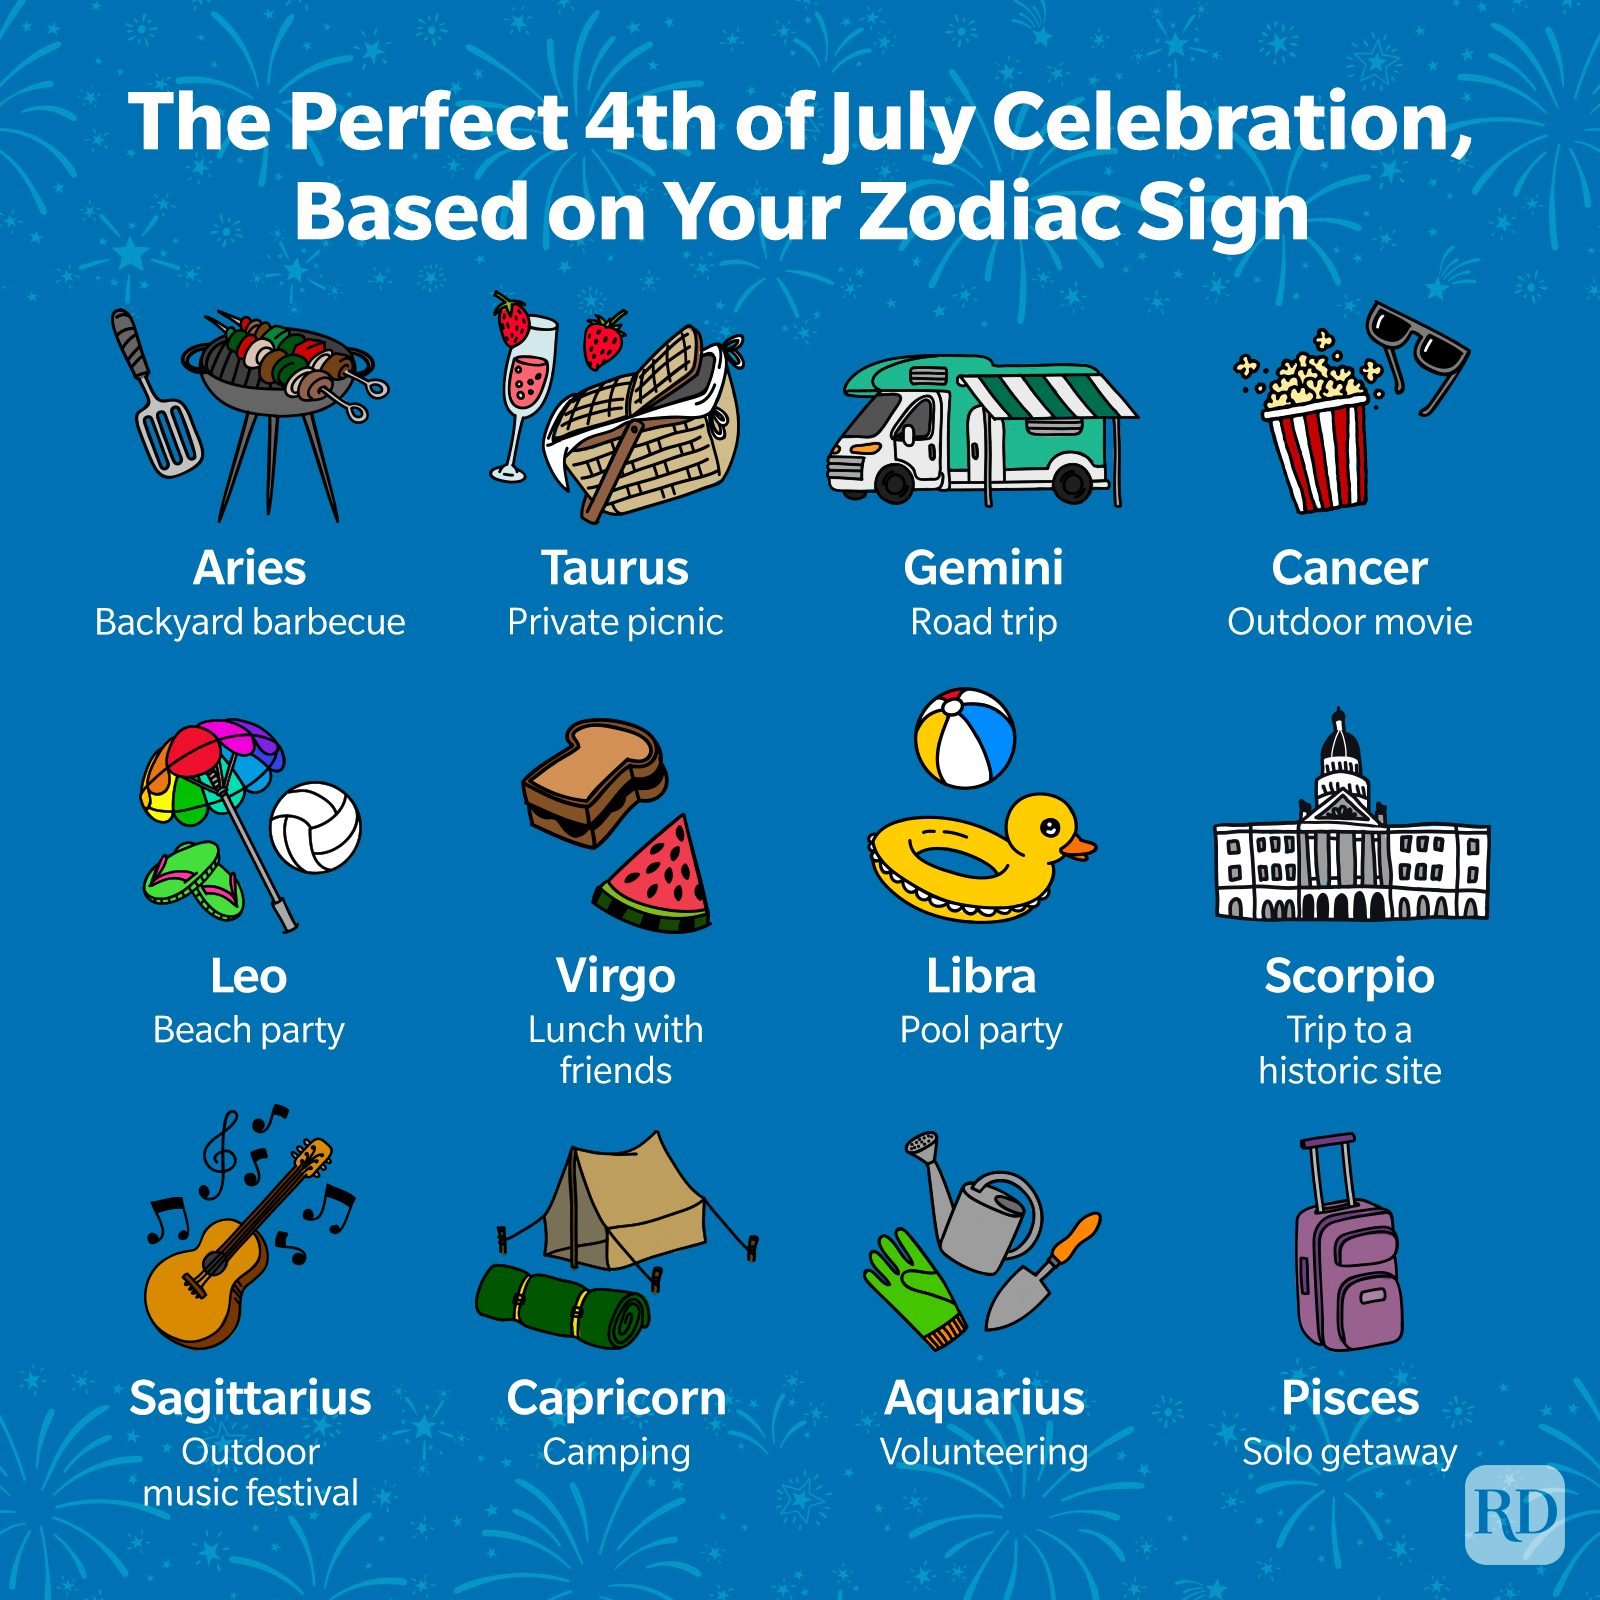 https://www.rd.com/wp-content/uploads/2022/06/The-Perfect-4th-of-July-Celebration-Based-on-Your-Zodiac-Sign-Infographic-GettyImages9.jpg